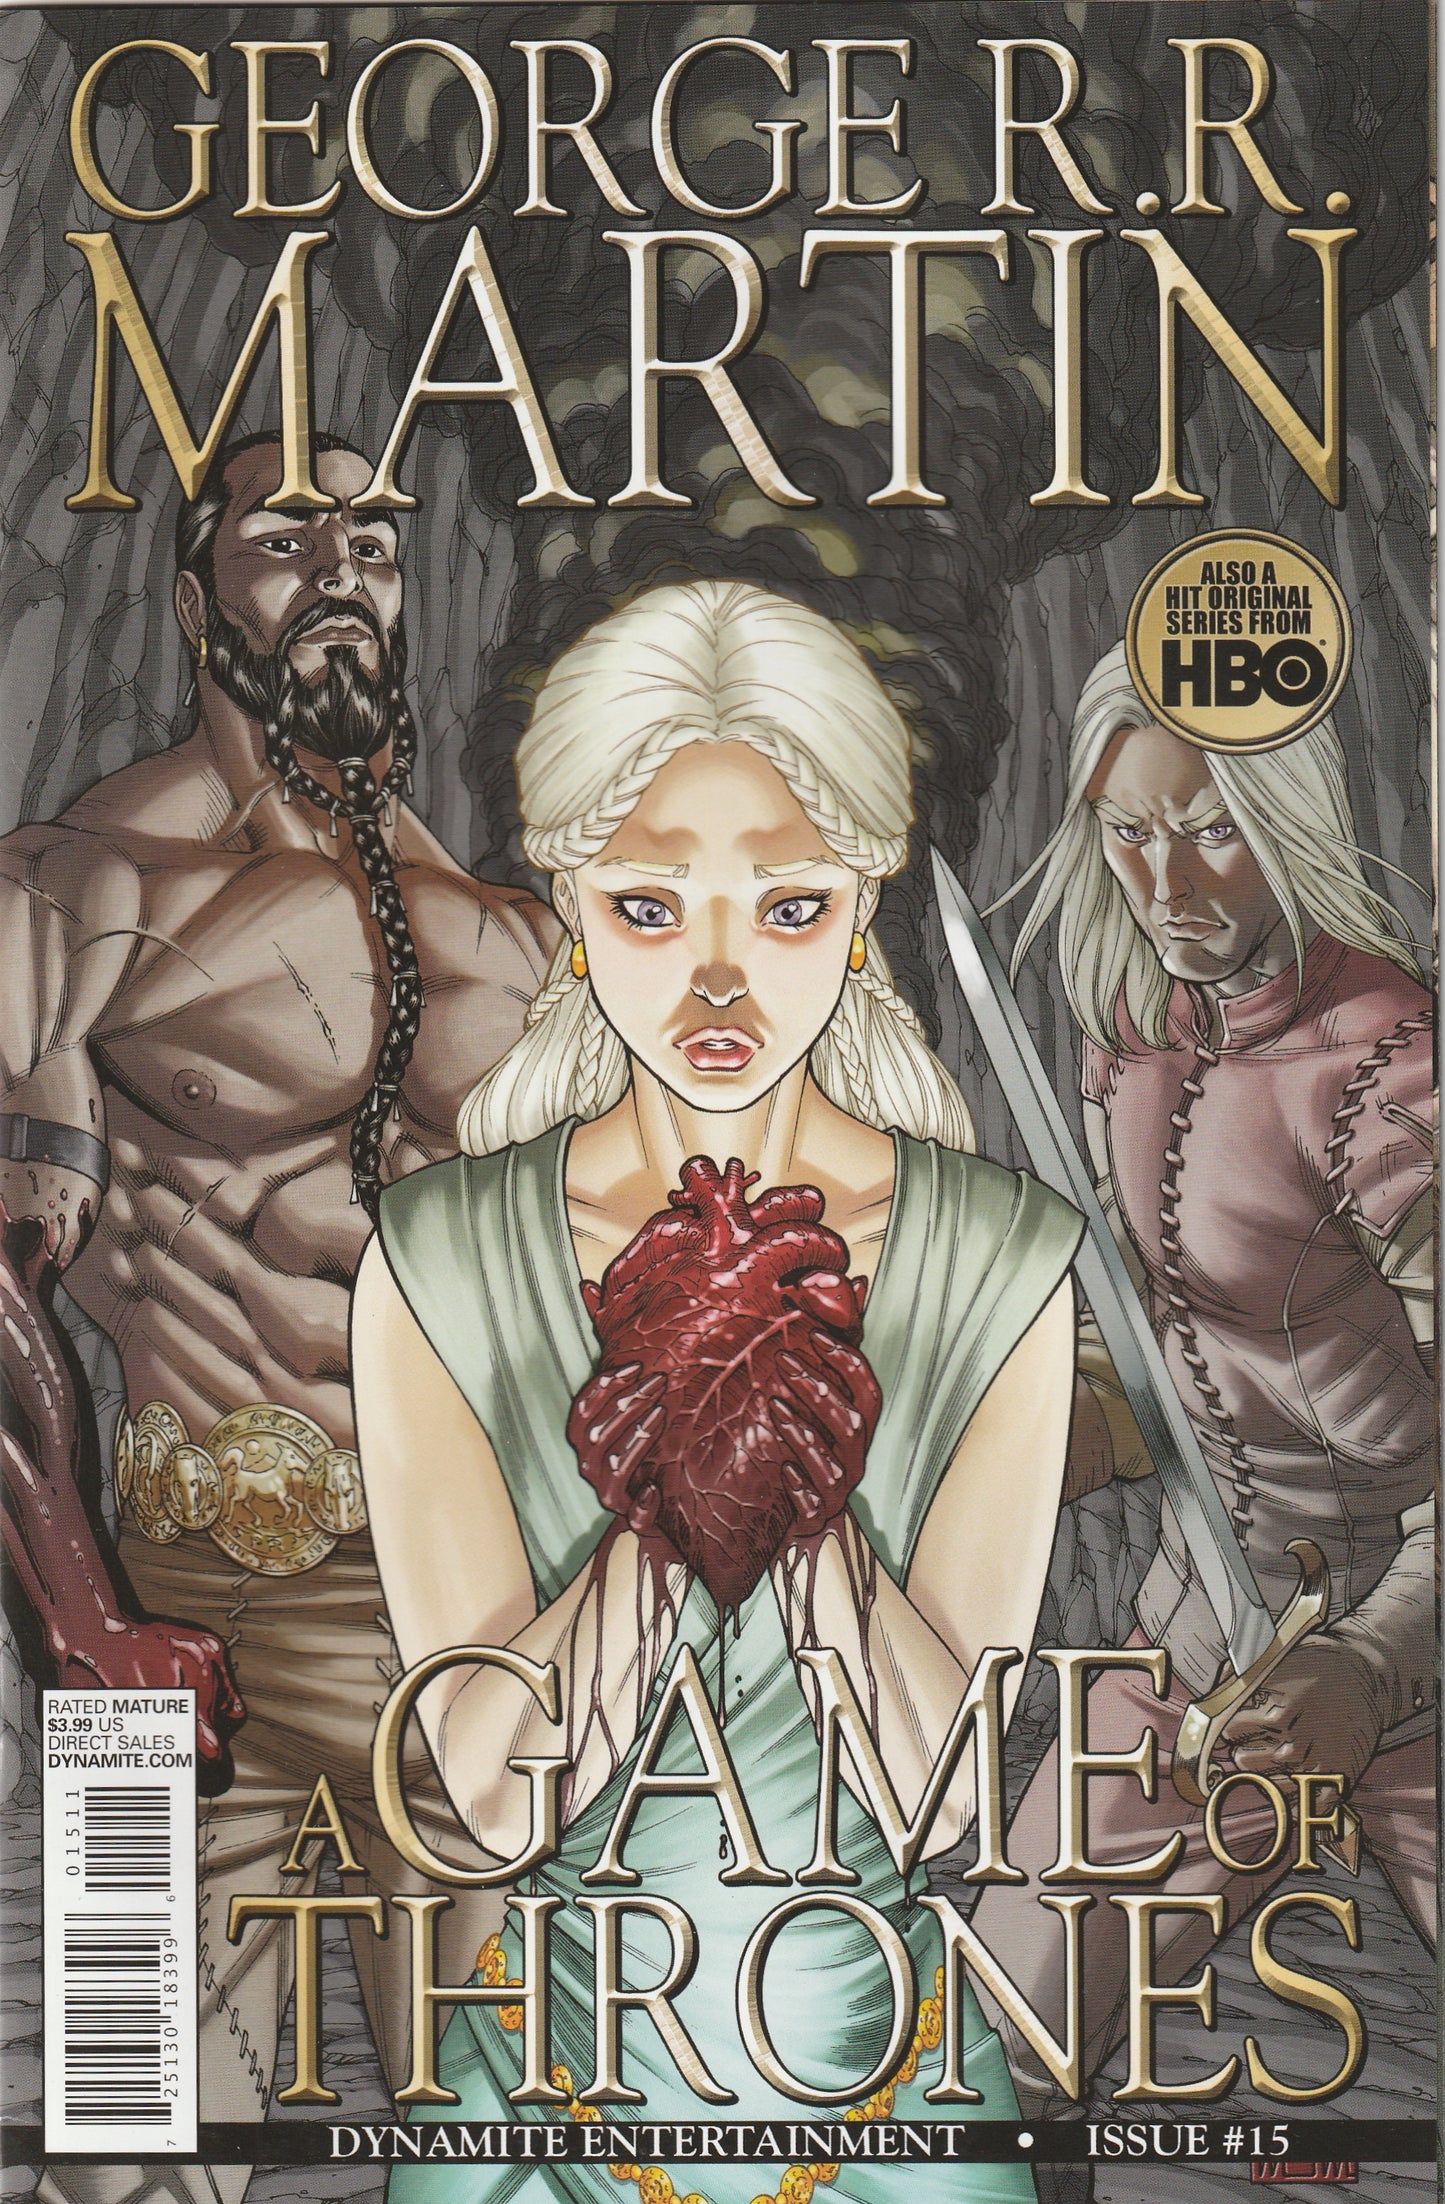 A Game of Thrones #15 (2013) - George R.R. Martin